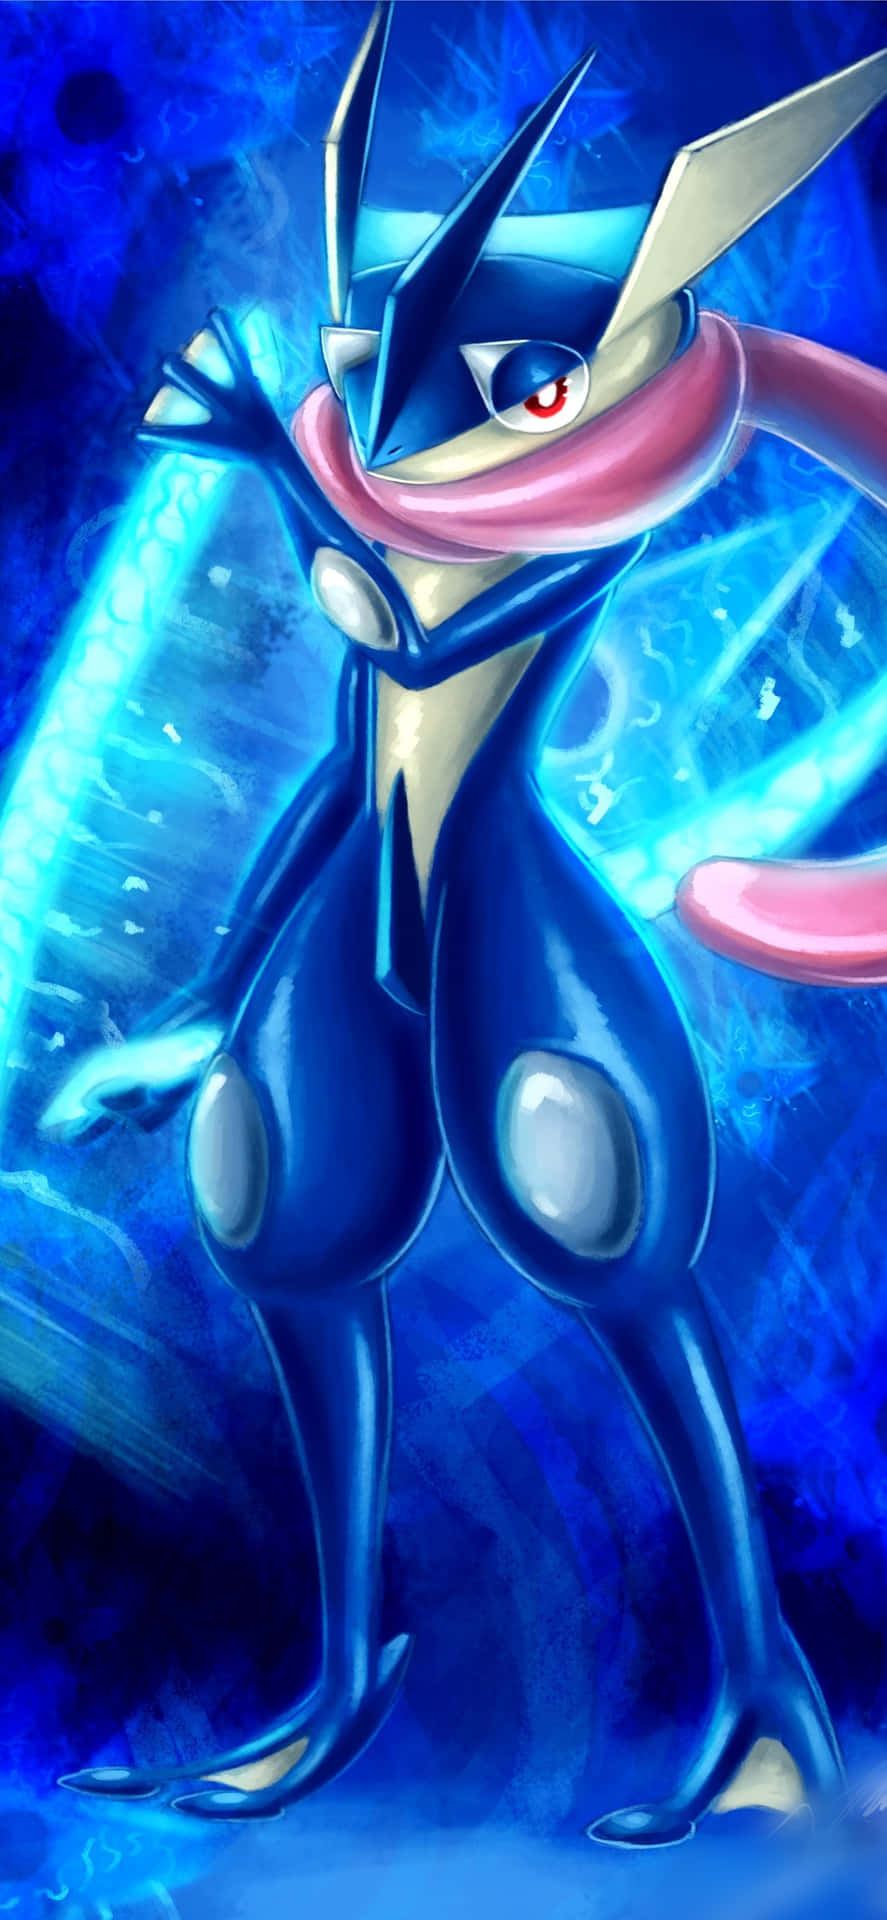 Greninja uses its speed and agility to prevail in battles!